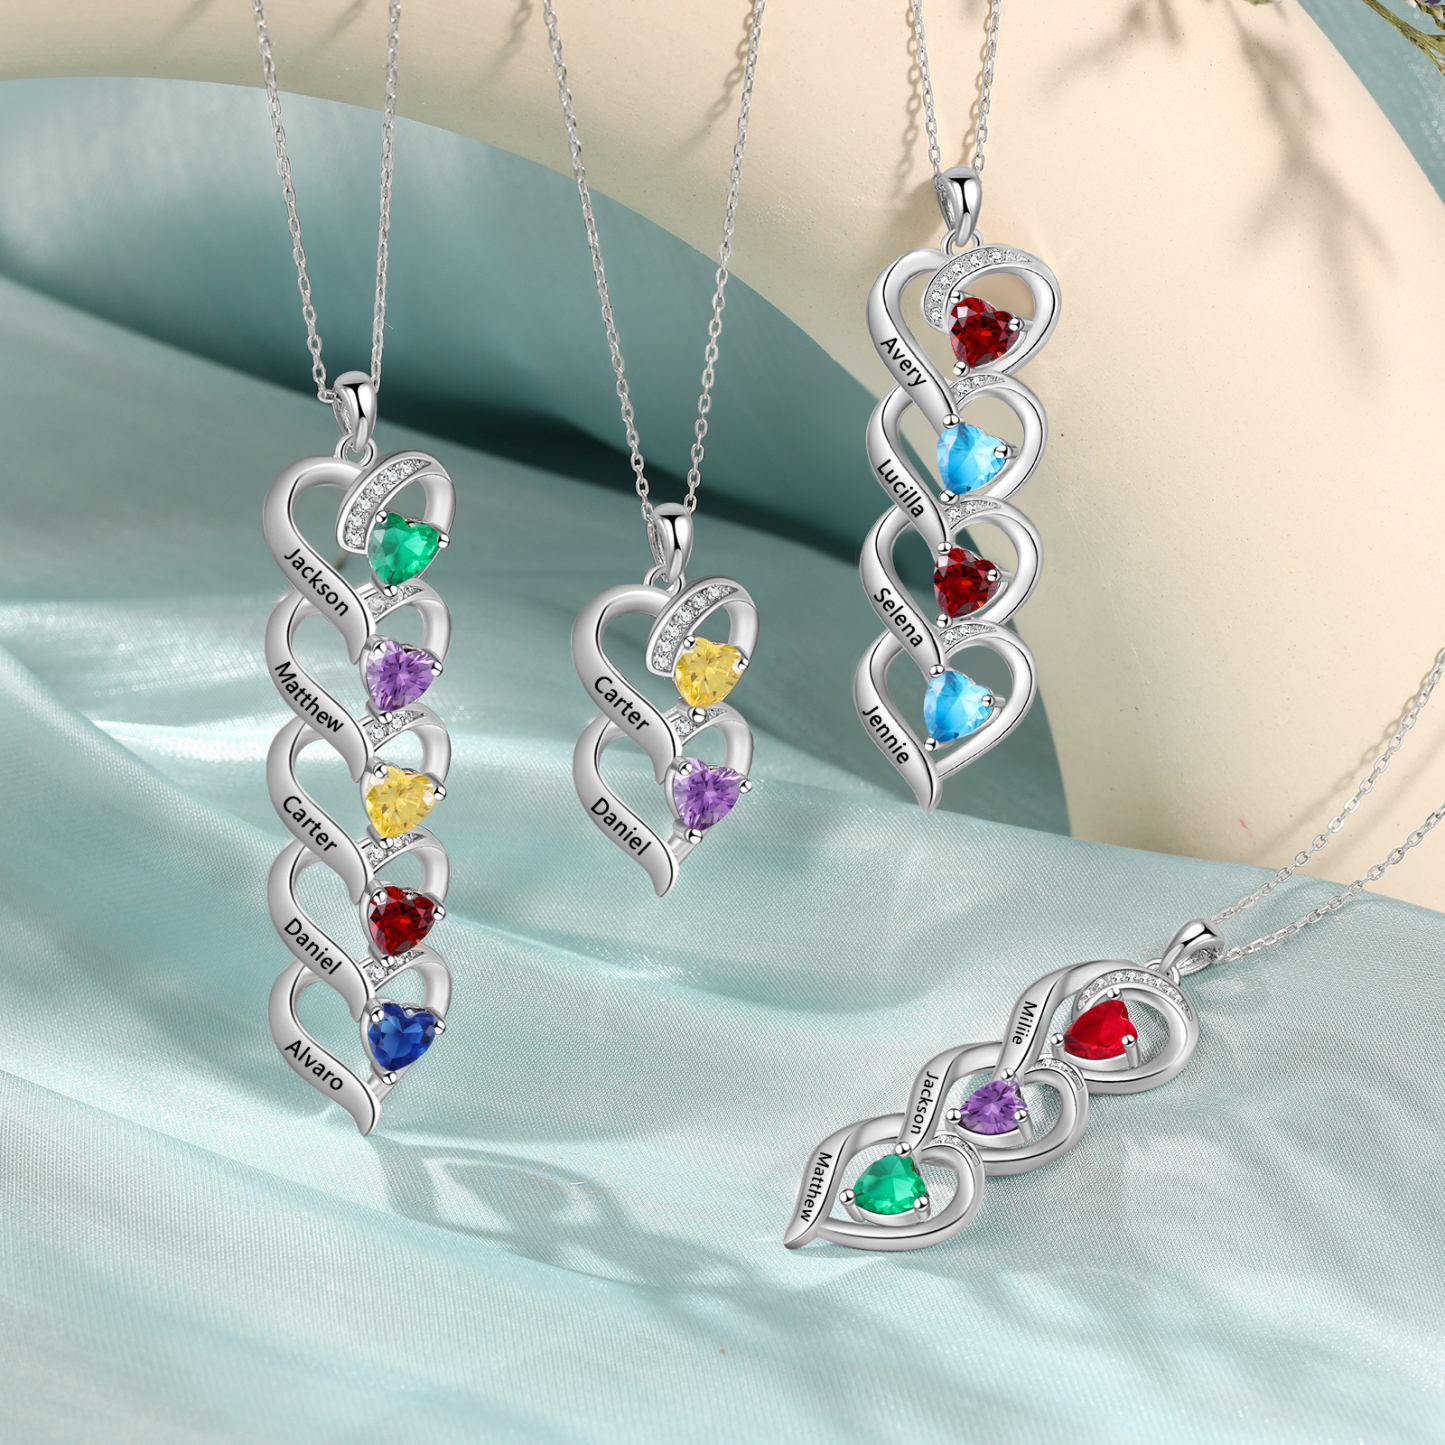 4 Name - Personalized Love Necklace with Customized Name and Birthstone, A Perfect and Exquisite Gift for Her